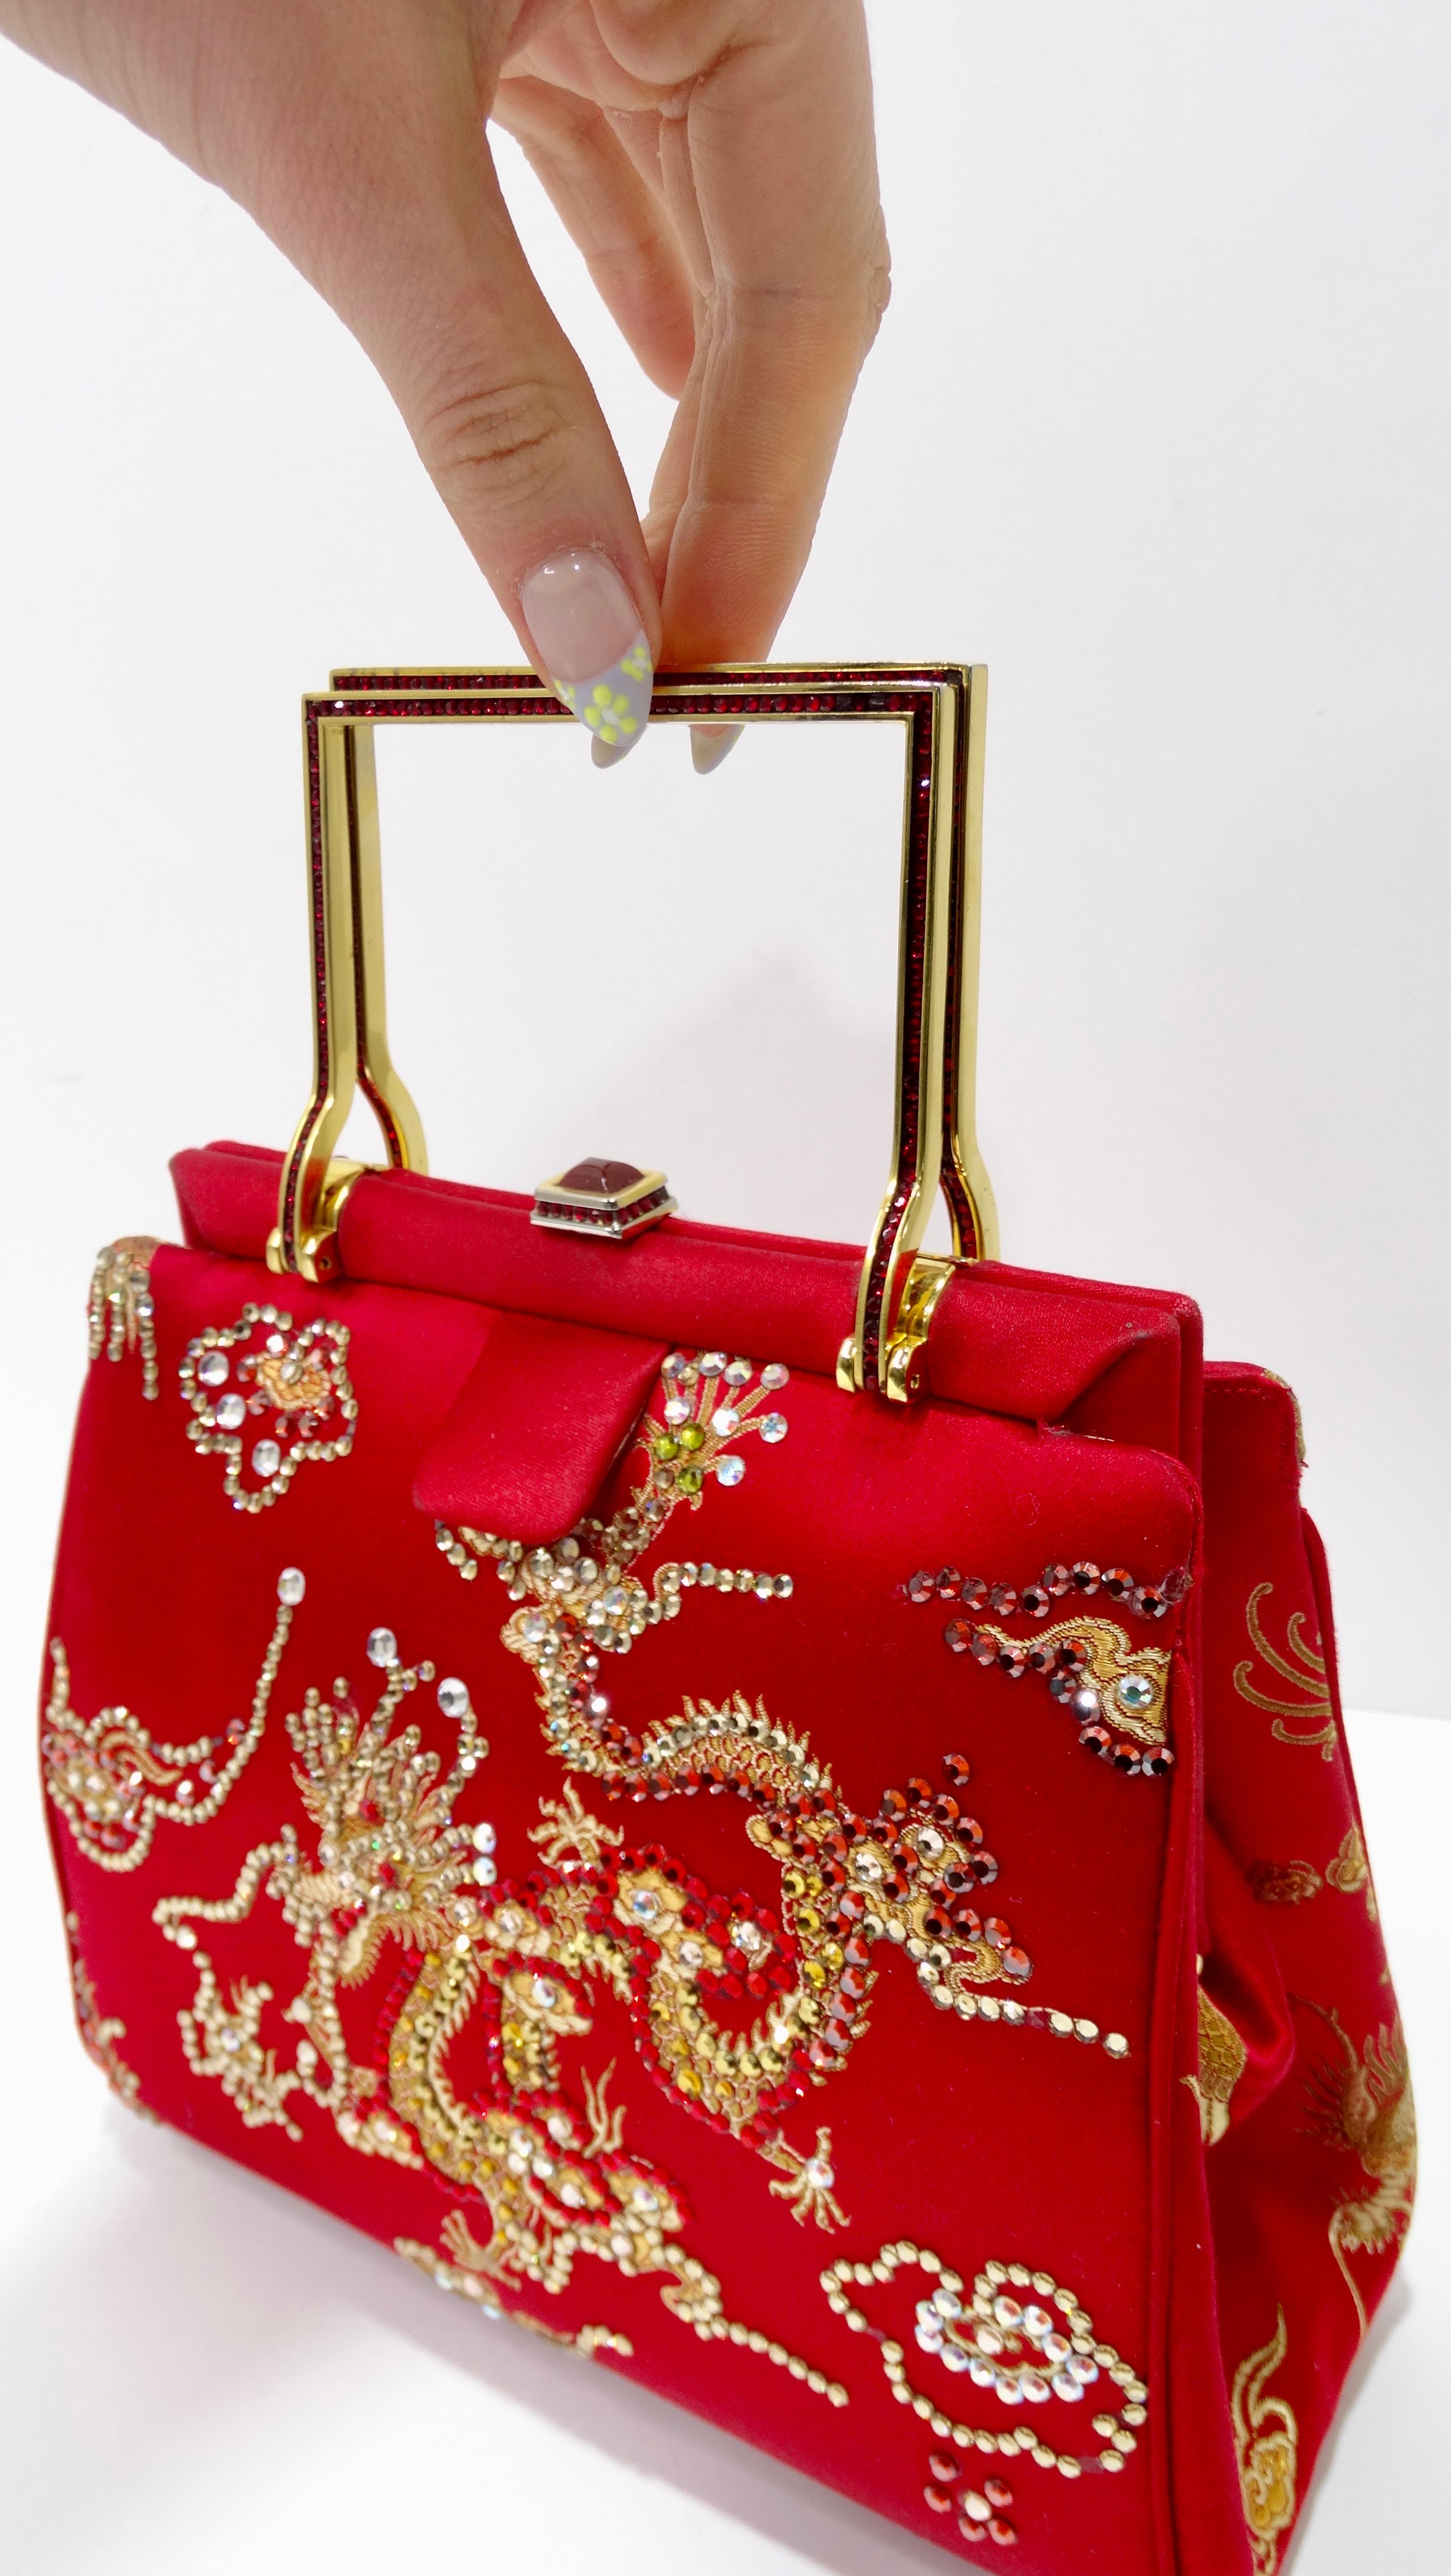 Elevate your look with this amazing Leiber! Circa 1970s, this red satin bag features a gorgeous rhinestoned Chinese dragon motif, gold hardware, dual top handles with red rhinestones, and a decorative top closure. Interior is lined with red satin